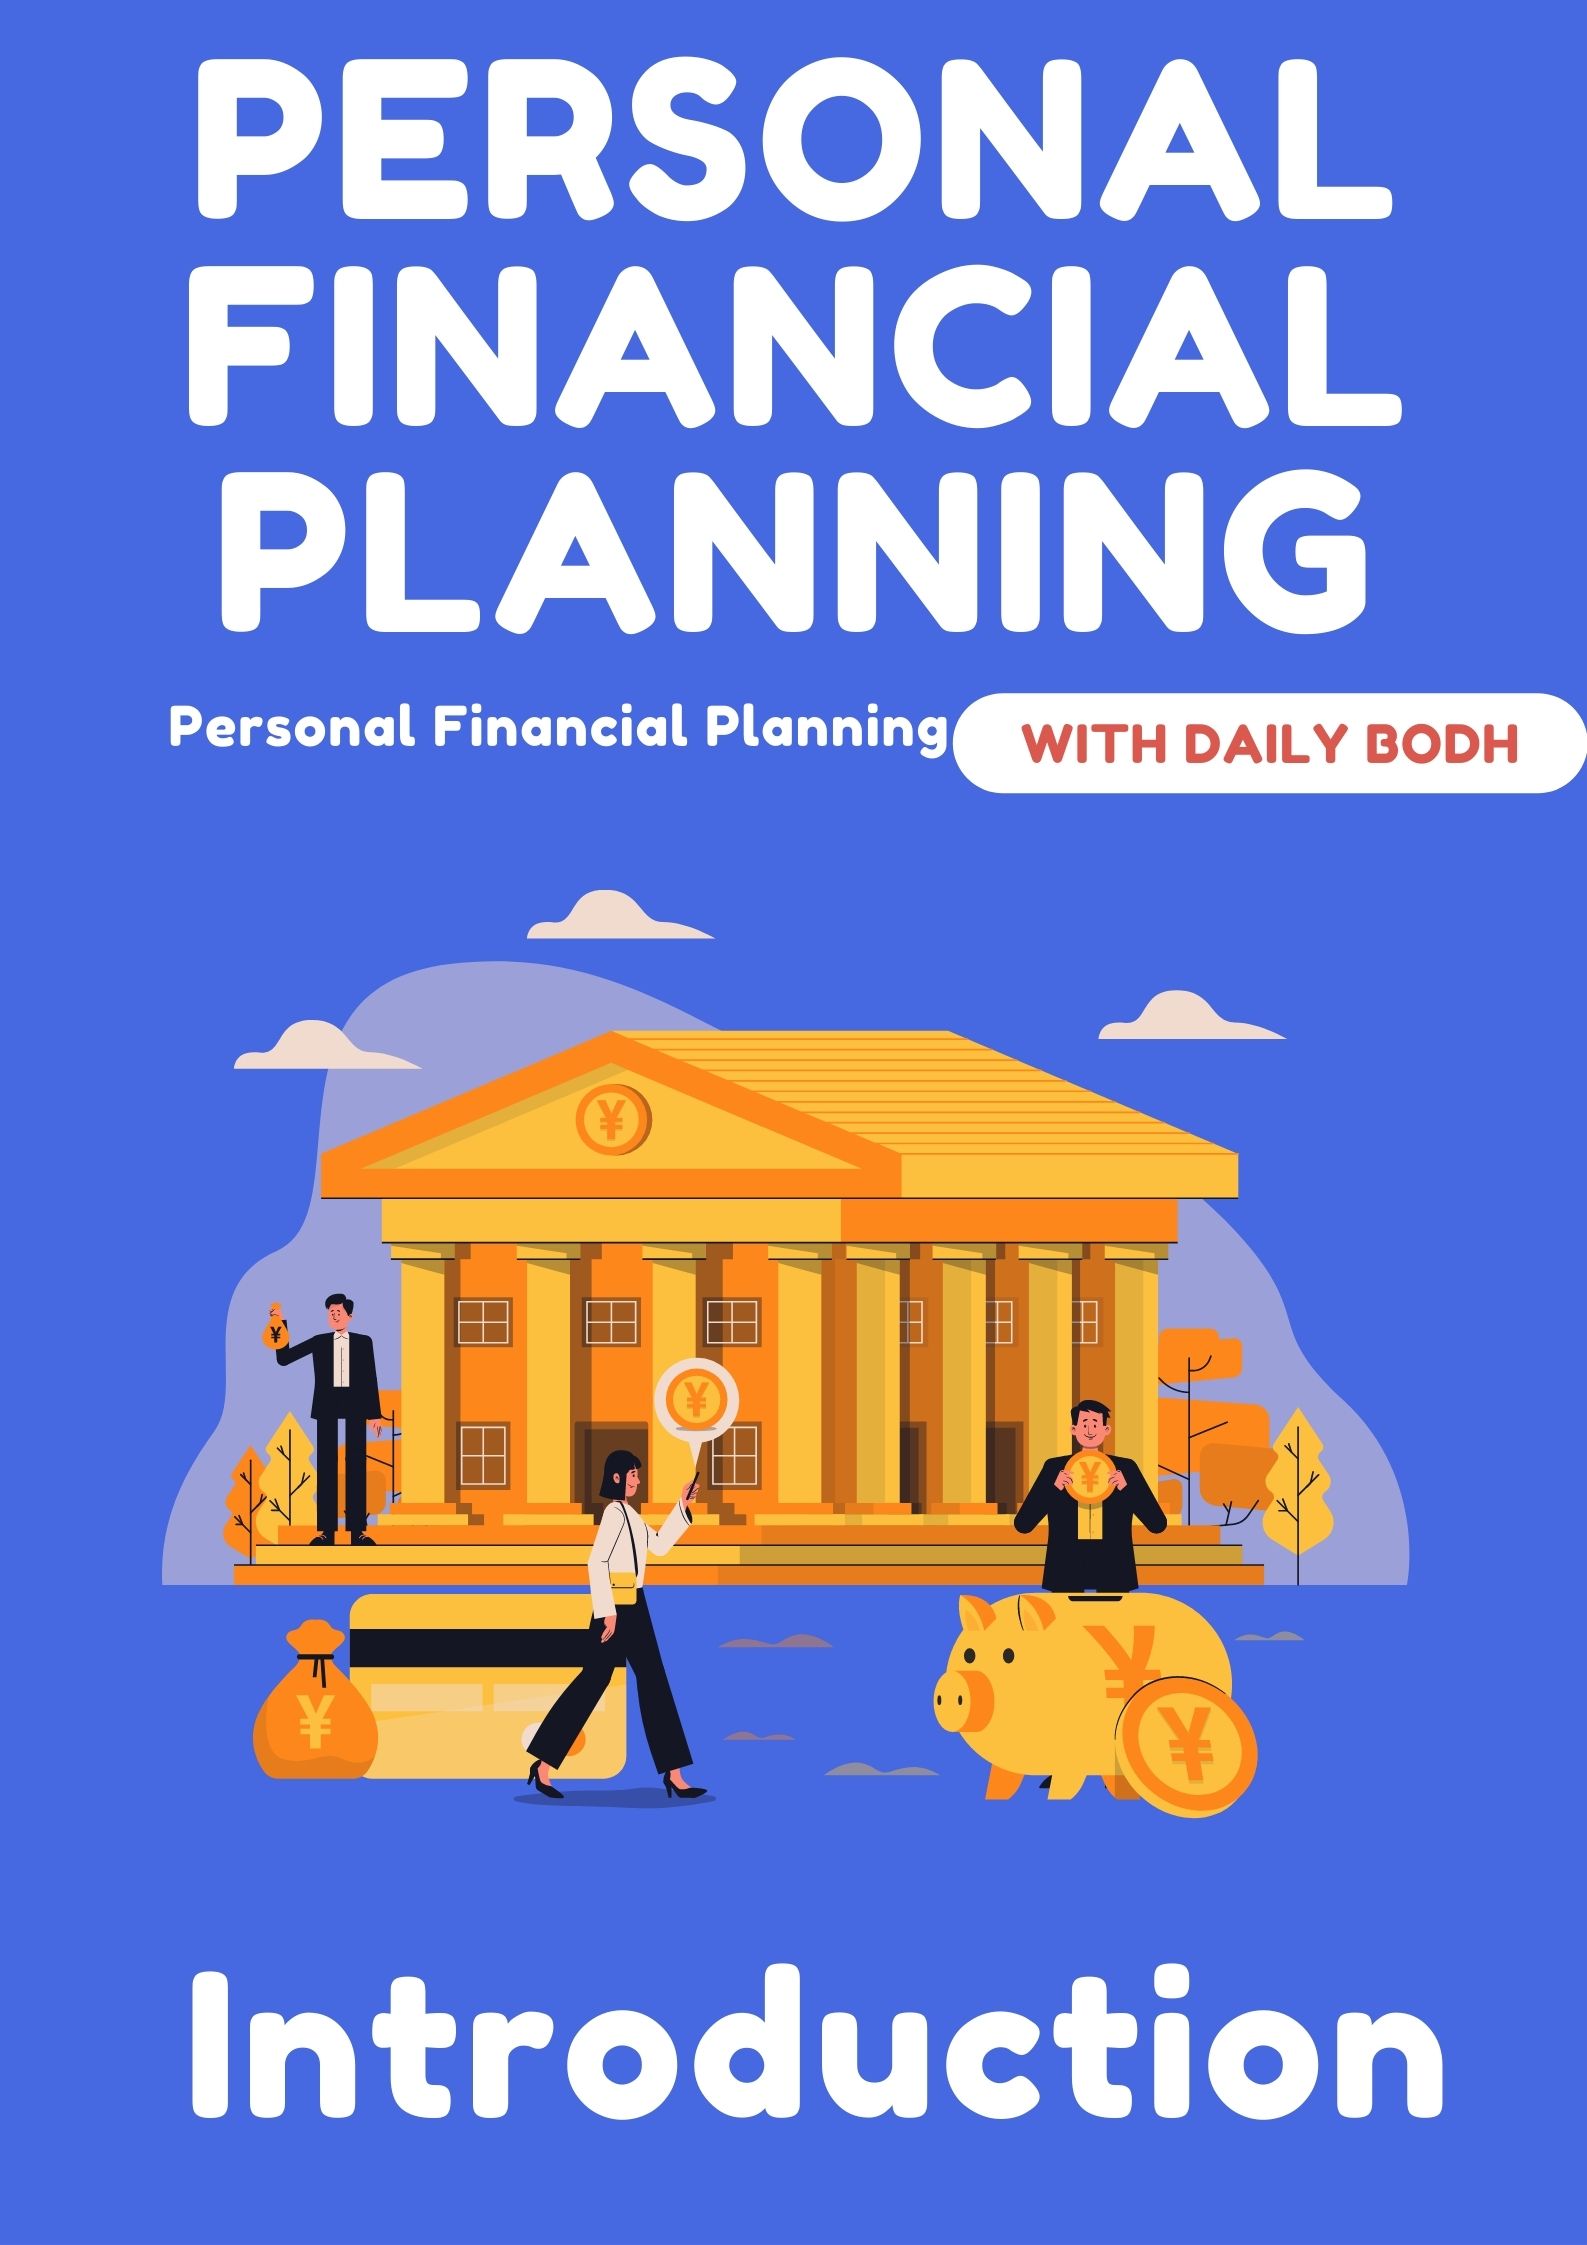 Introduction (Personal Financial Planning)